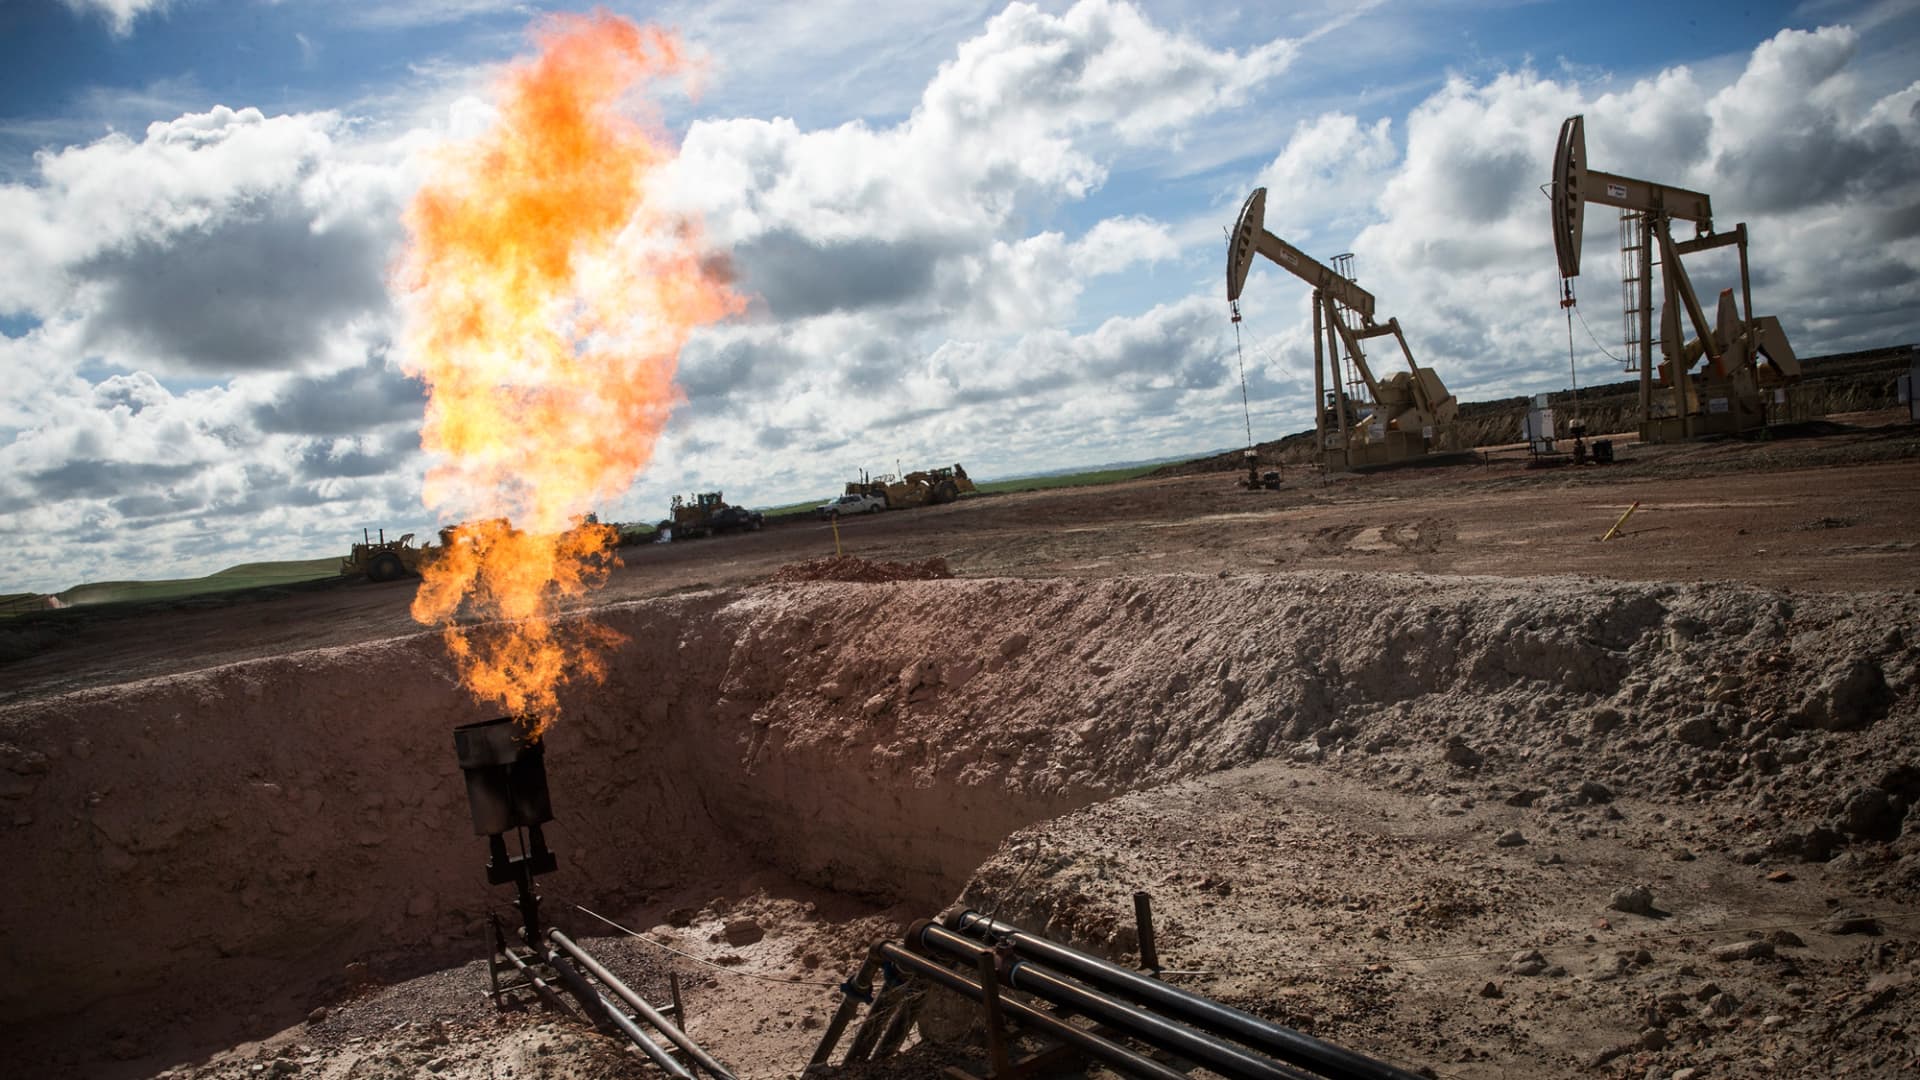 Democrats urge EPA to tighten gas flaring restrictions to curb